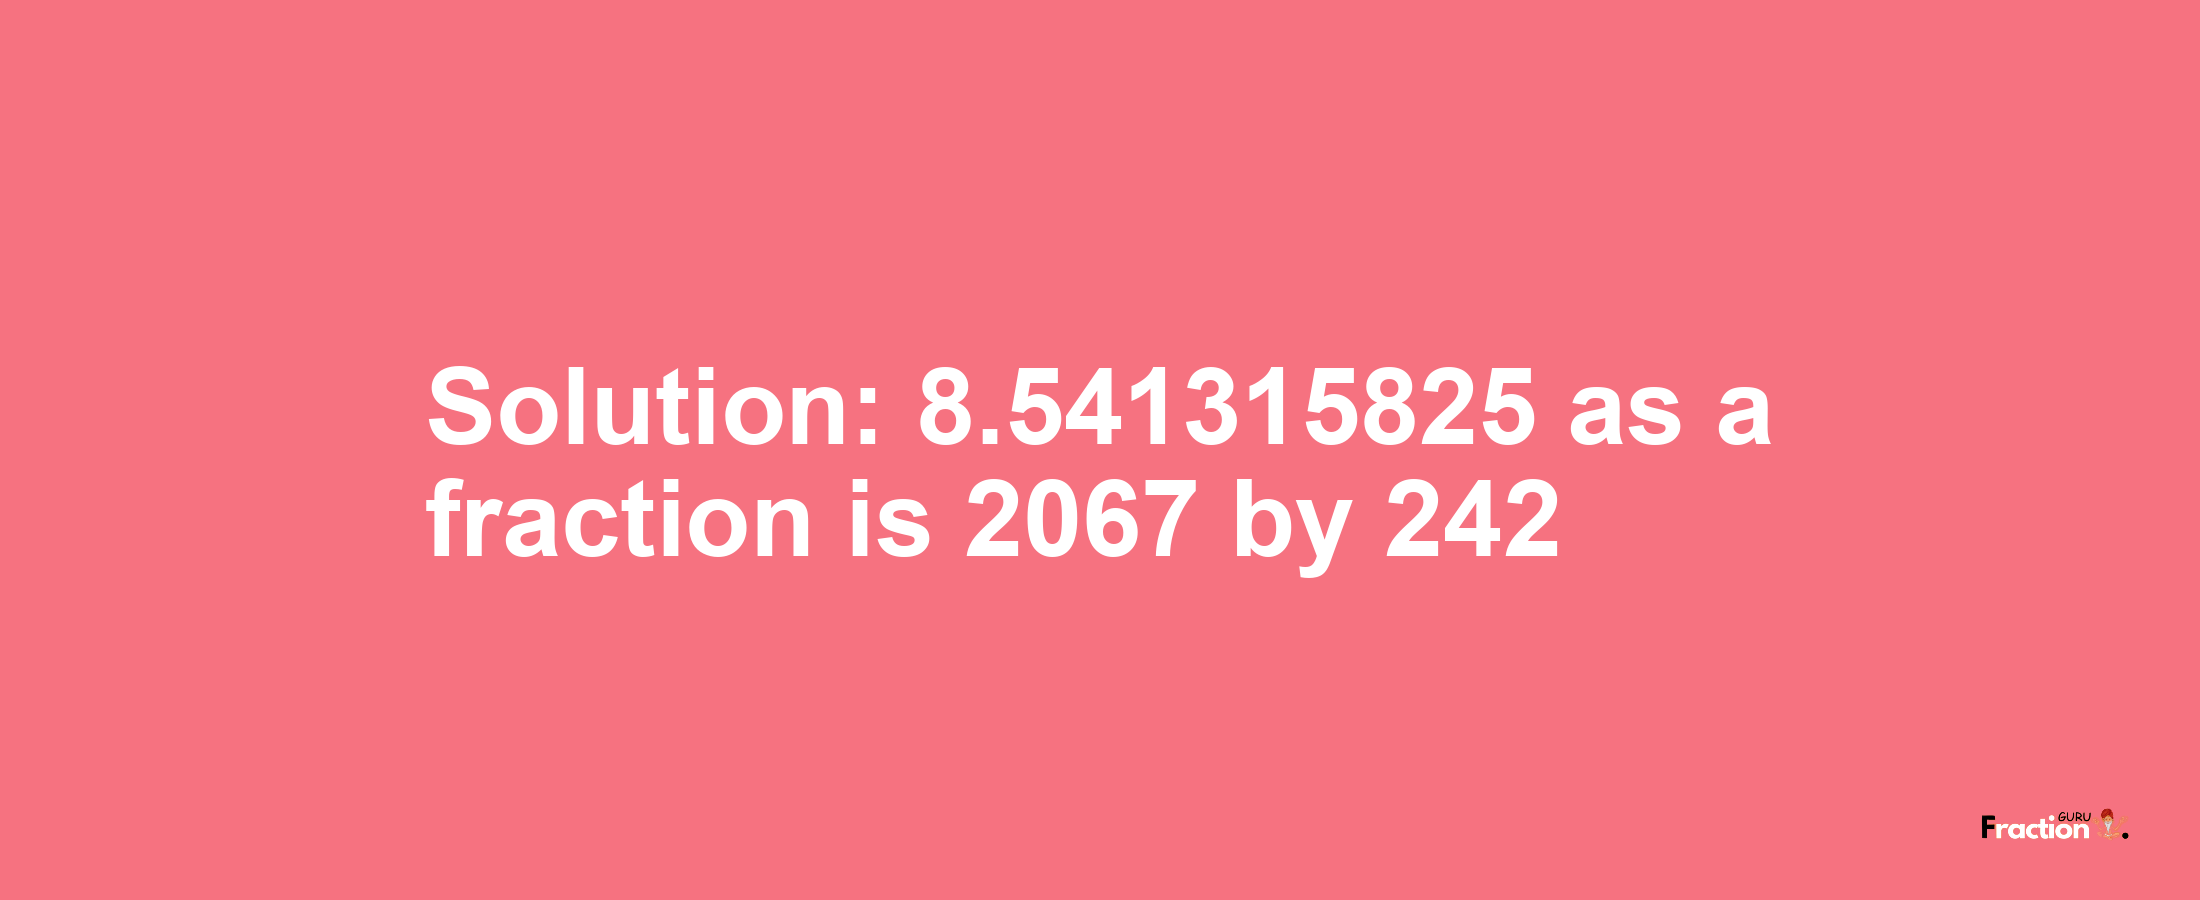 Solution:8.541315825 as a fraction is 2067/242